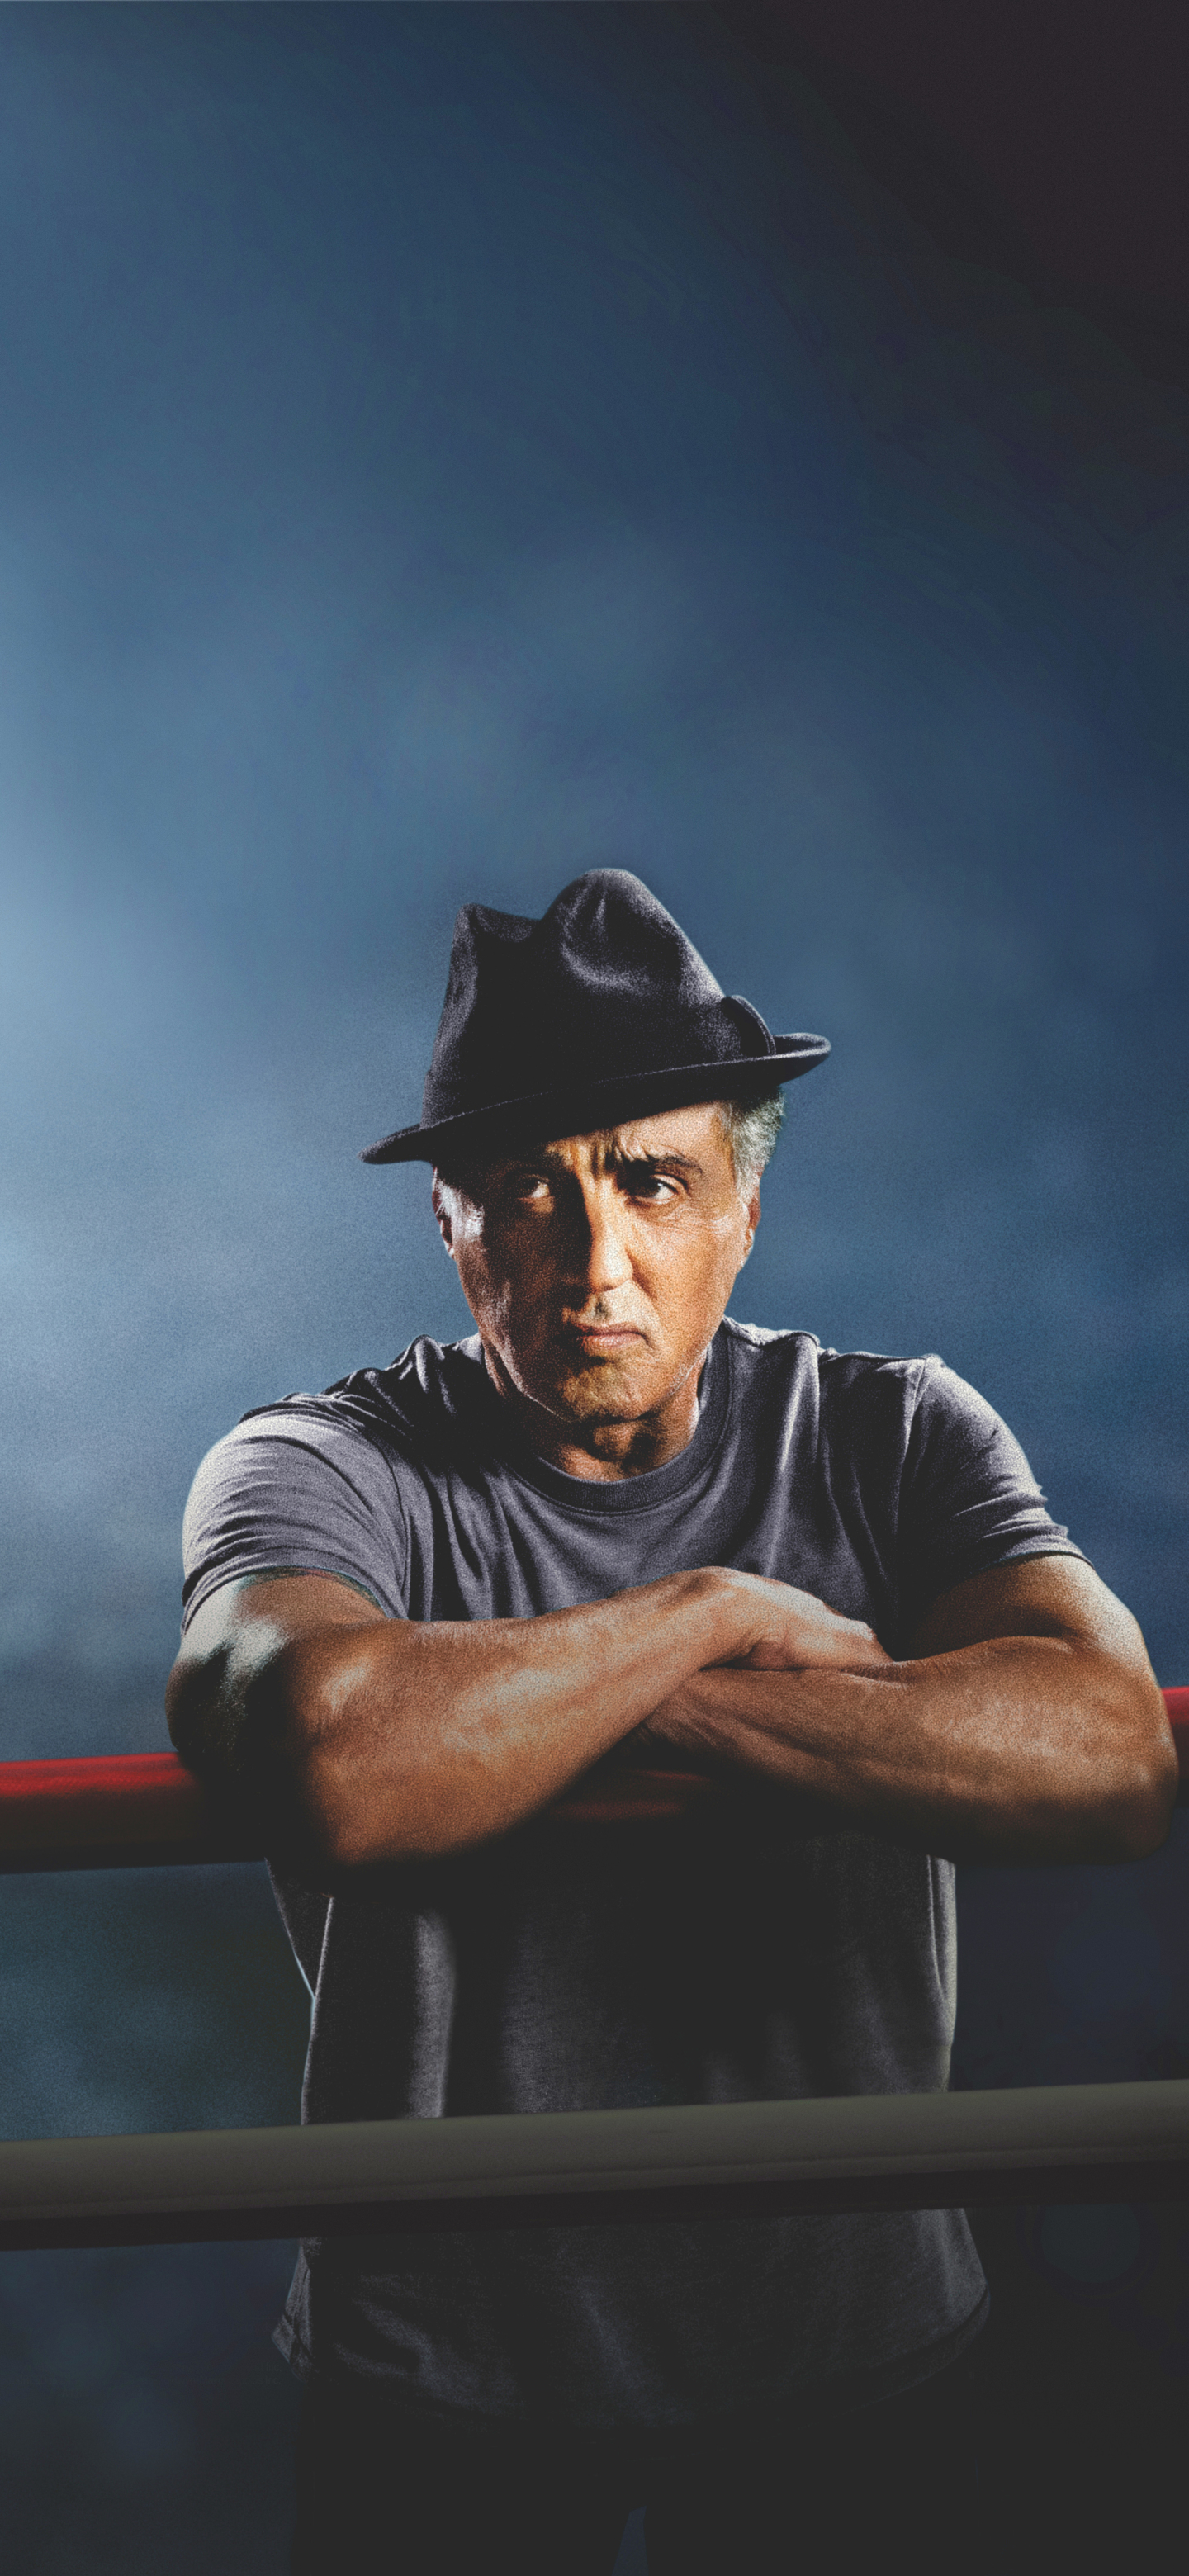 1080x1920 / 1080x1920 creed 2, 2018 movies, movies, hd, sylvester stallone  for Iphone 6, 7, 8 wallpaper - Coolwallpapers.me!